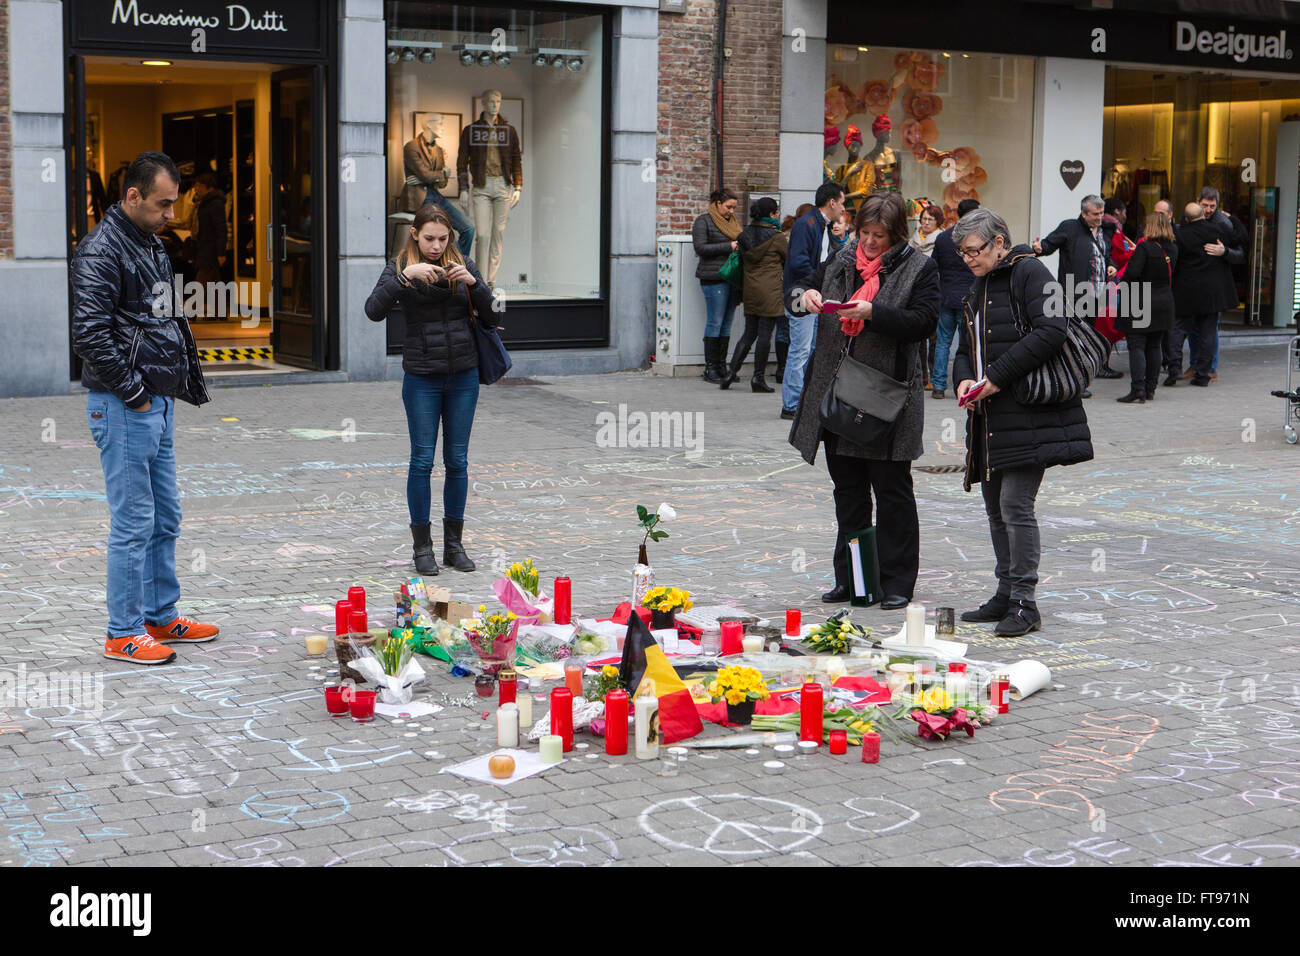 Namur, Belgium. 25 Mar, 2016. Bystanders look at the messages and candle that were posted during the Tribute to the victims of March 22nd terrorist attacks on Brussels in Namur, Belgium. Credit:  Frédéric de Laminne/Alamy Live News Stock Photo